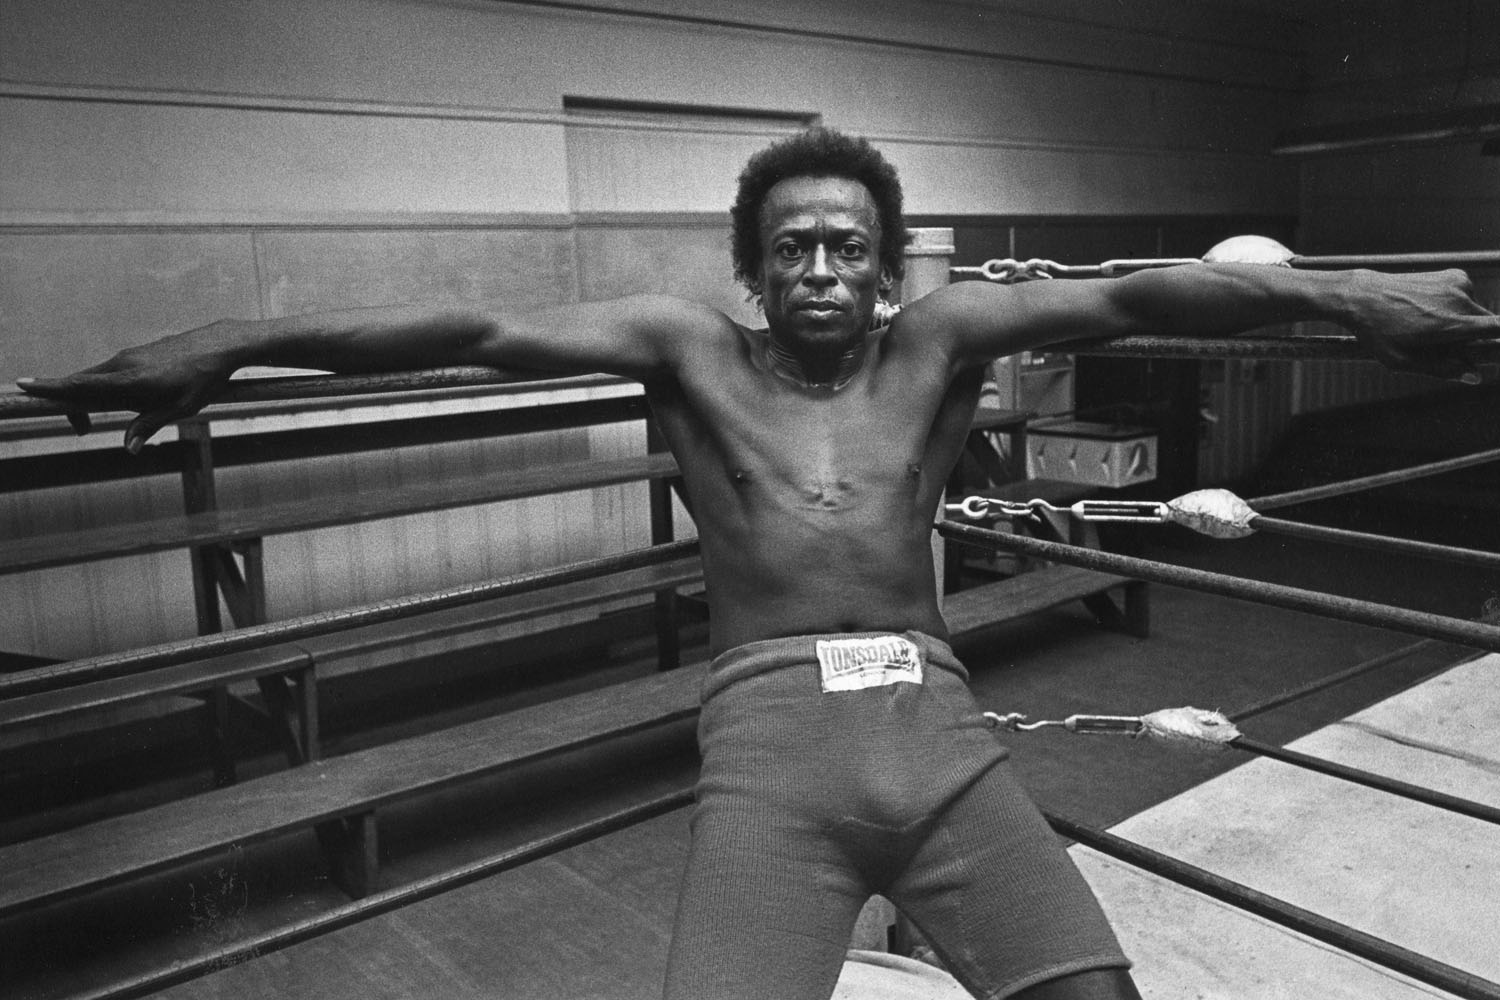 Miles Davis in the Ring, Newman’s Gym, San Francisco, Calif., 1971